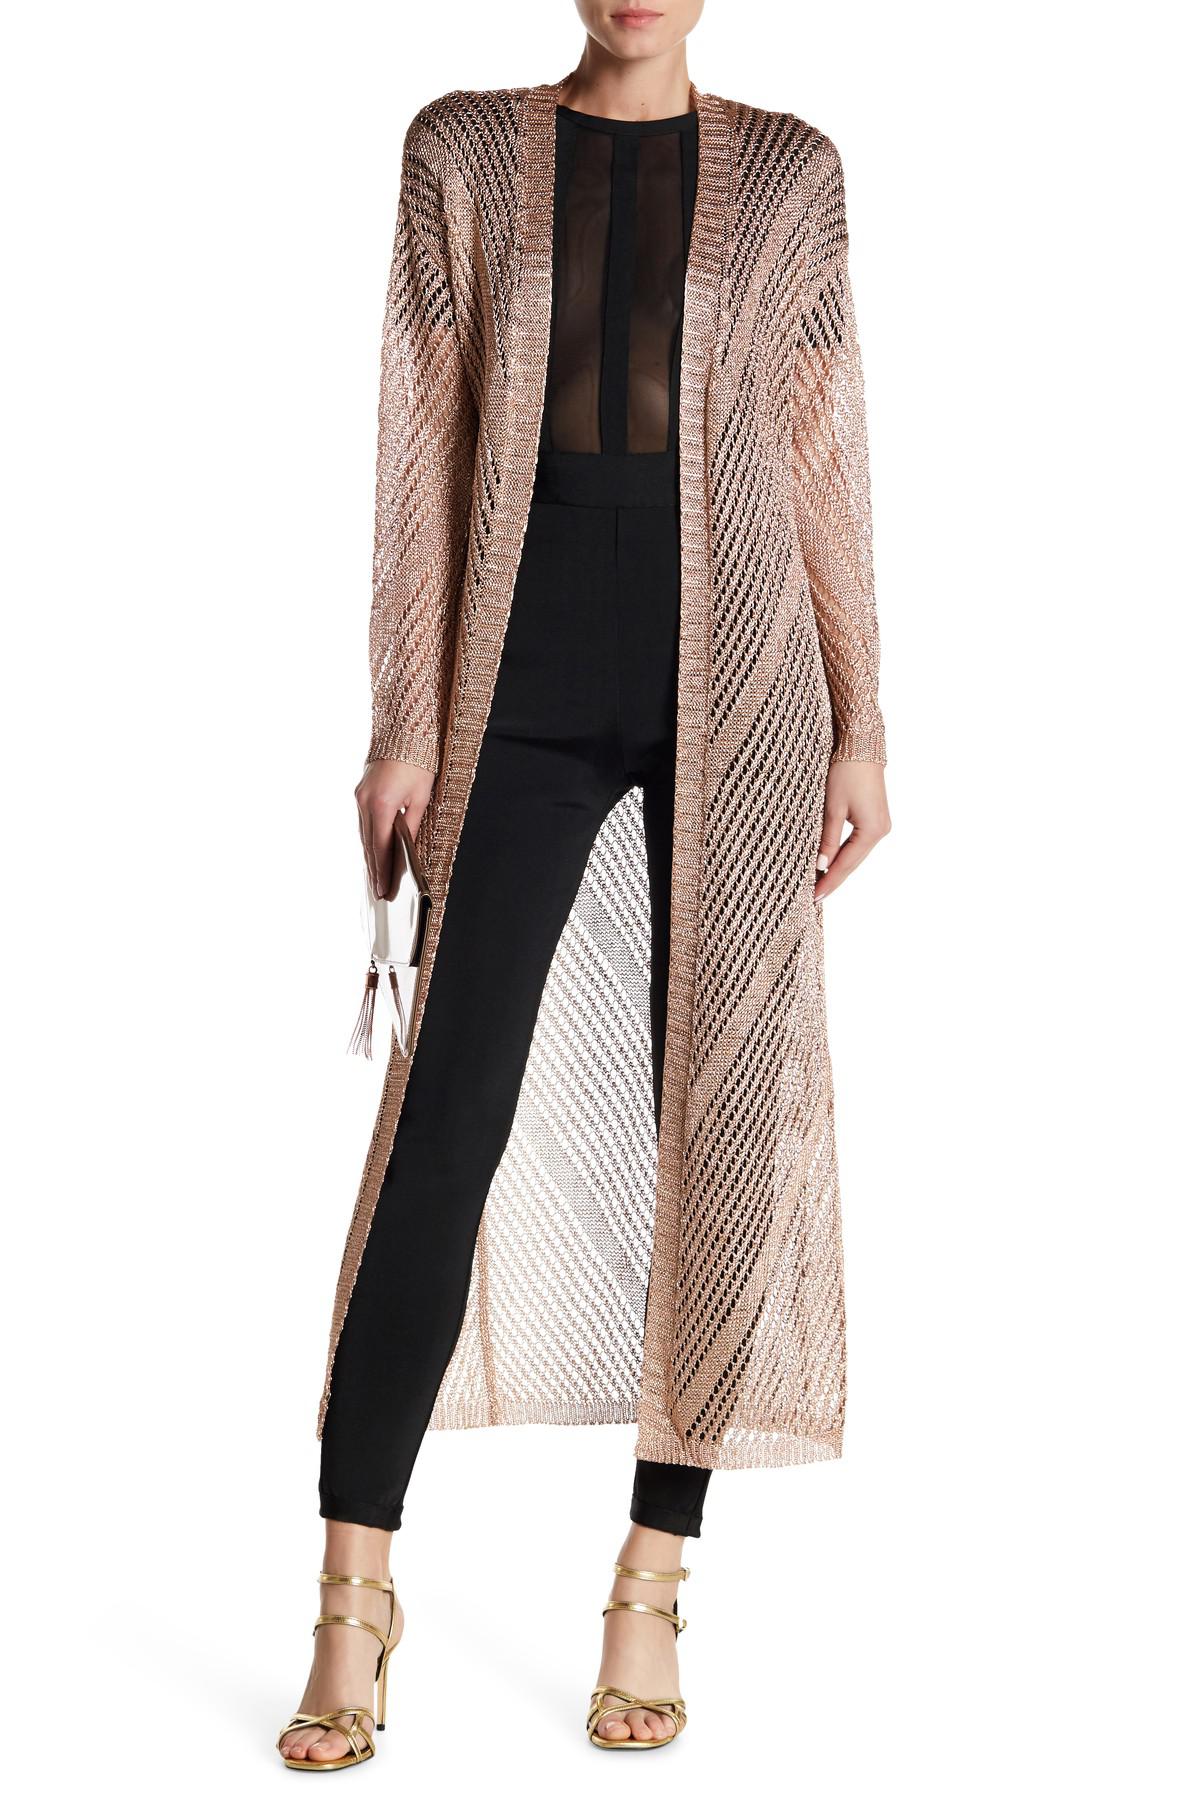 Wow Couture Synthetic Metallic Knit Long Cardigan - Lyst